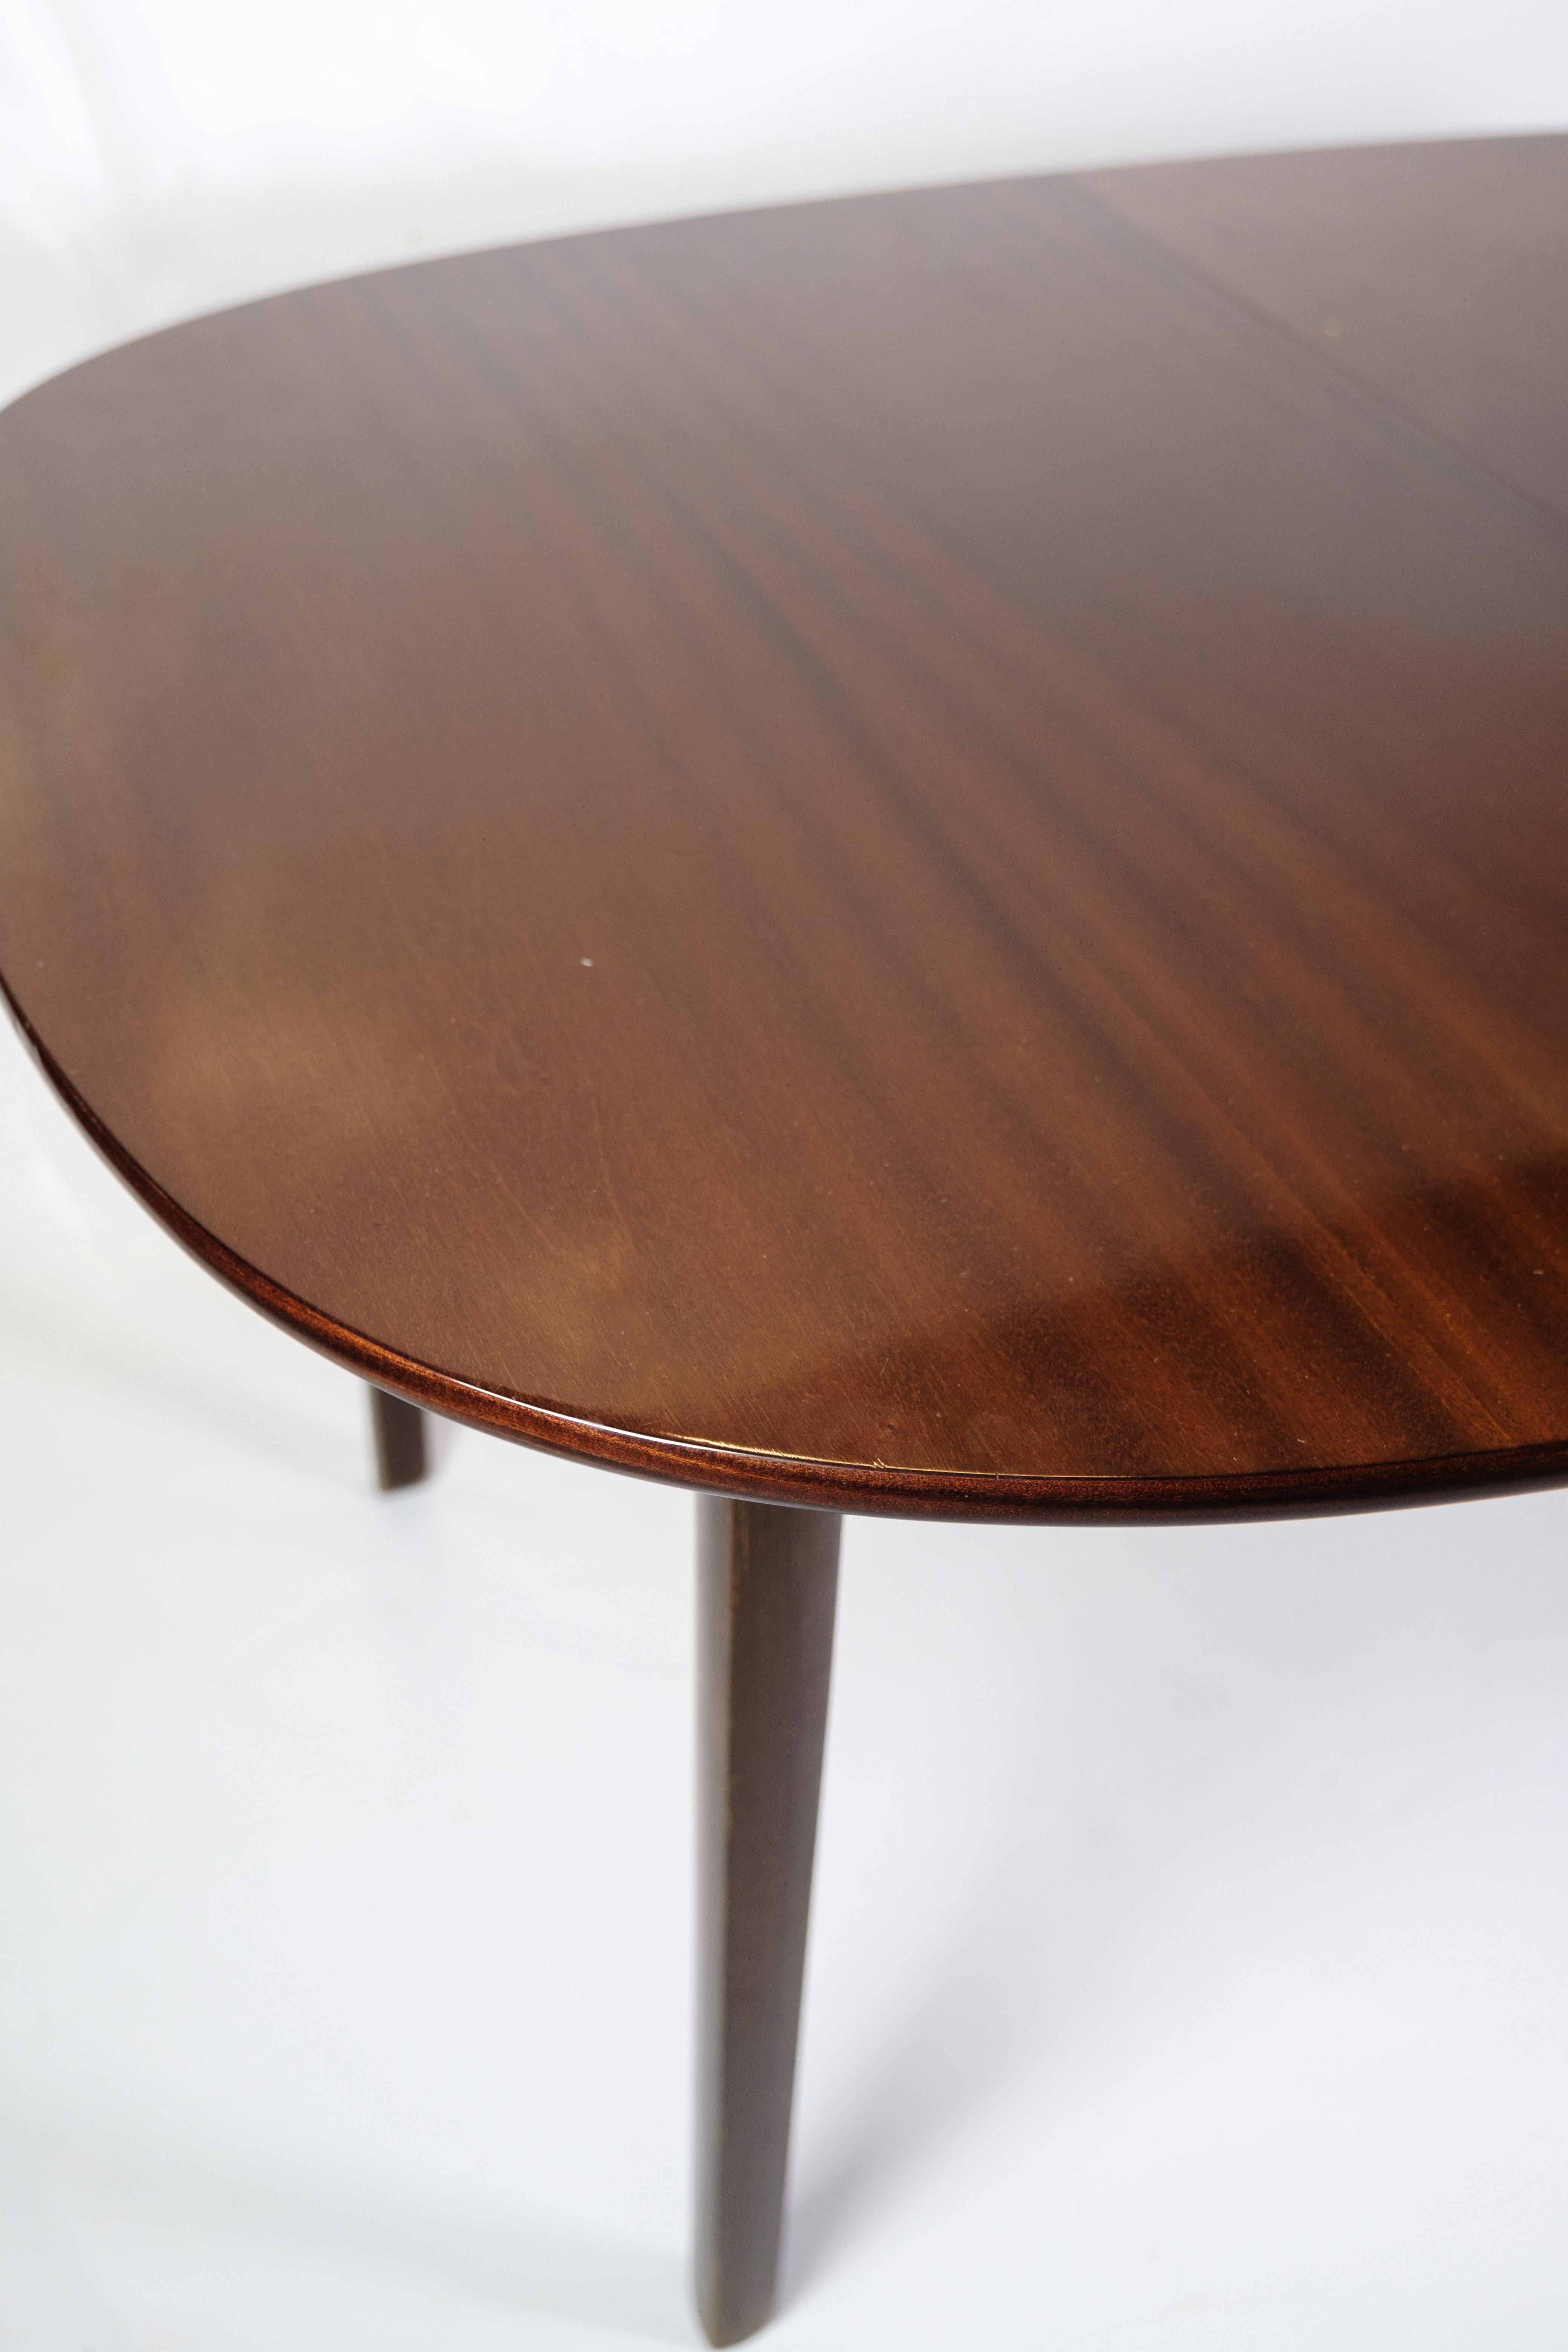 Danish Dining Room Table Made In Mahogany By Ole Wanscher From 1960s For Sale